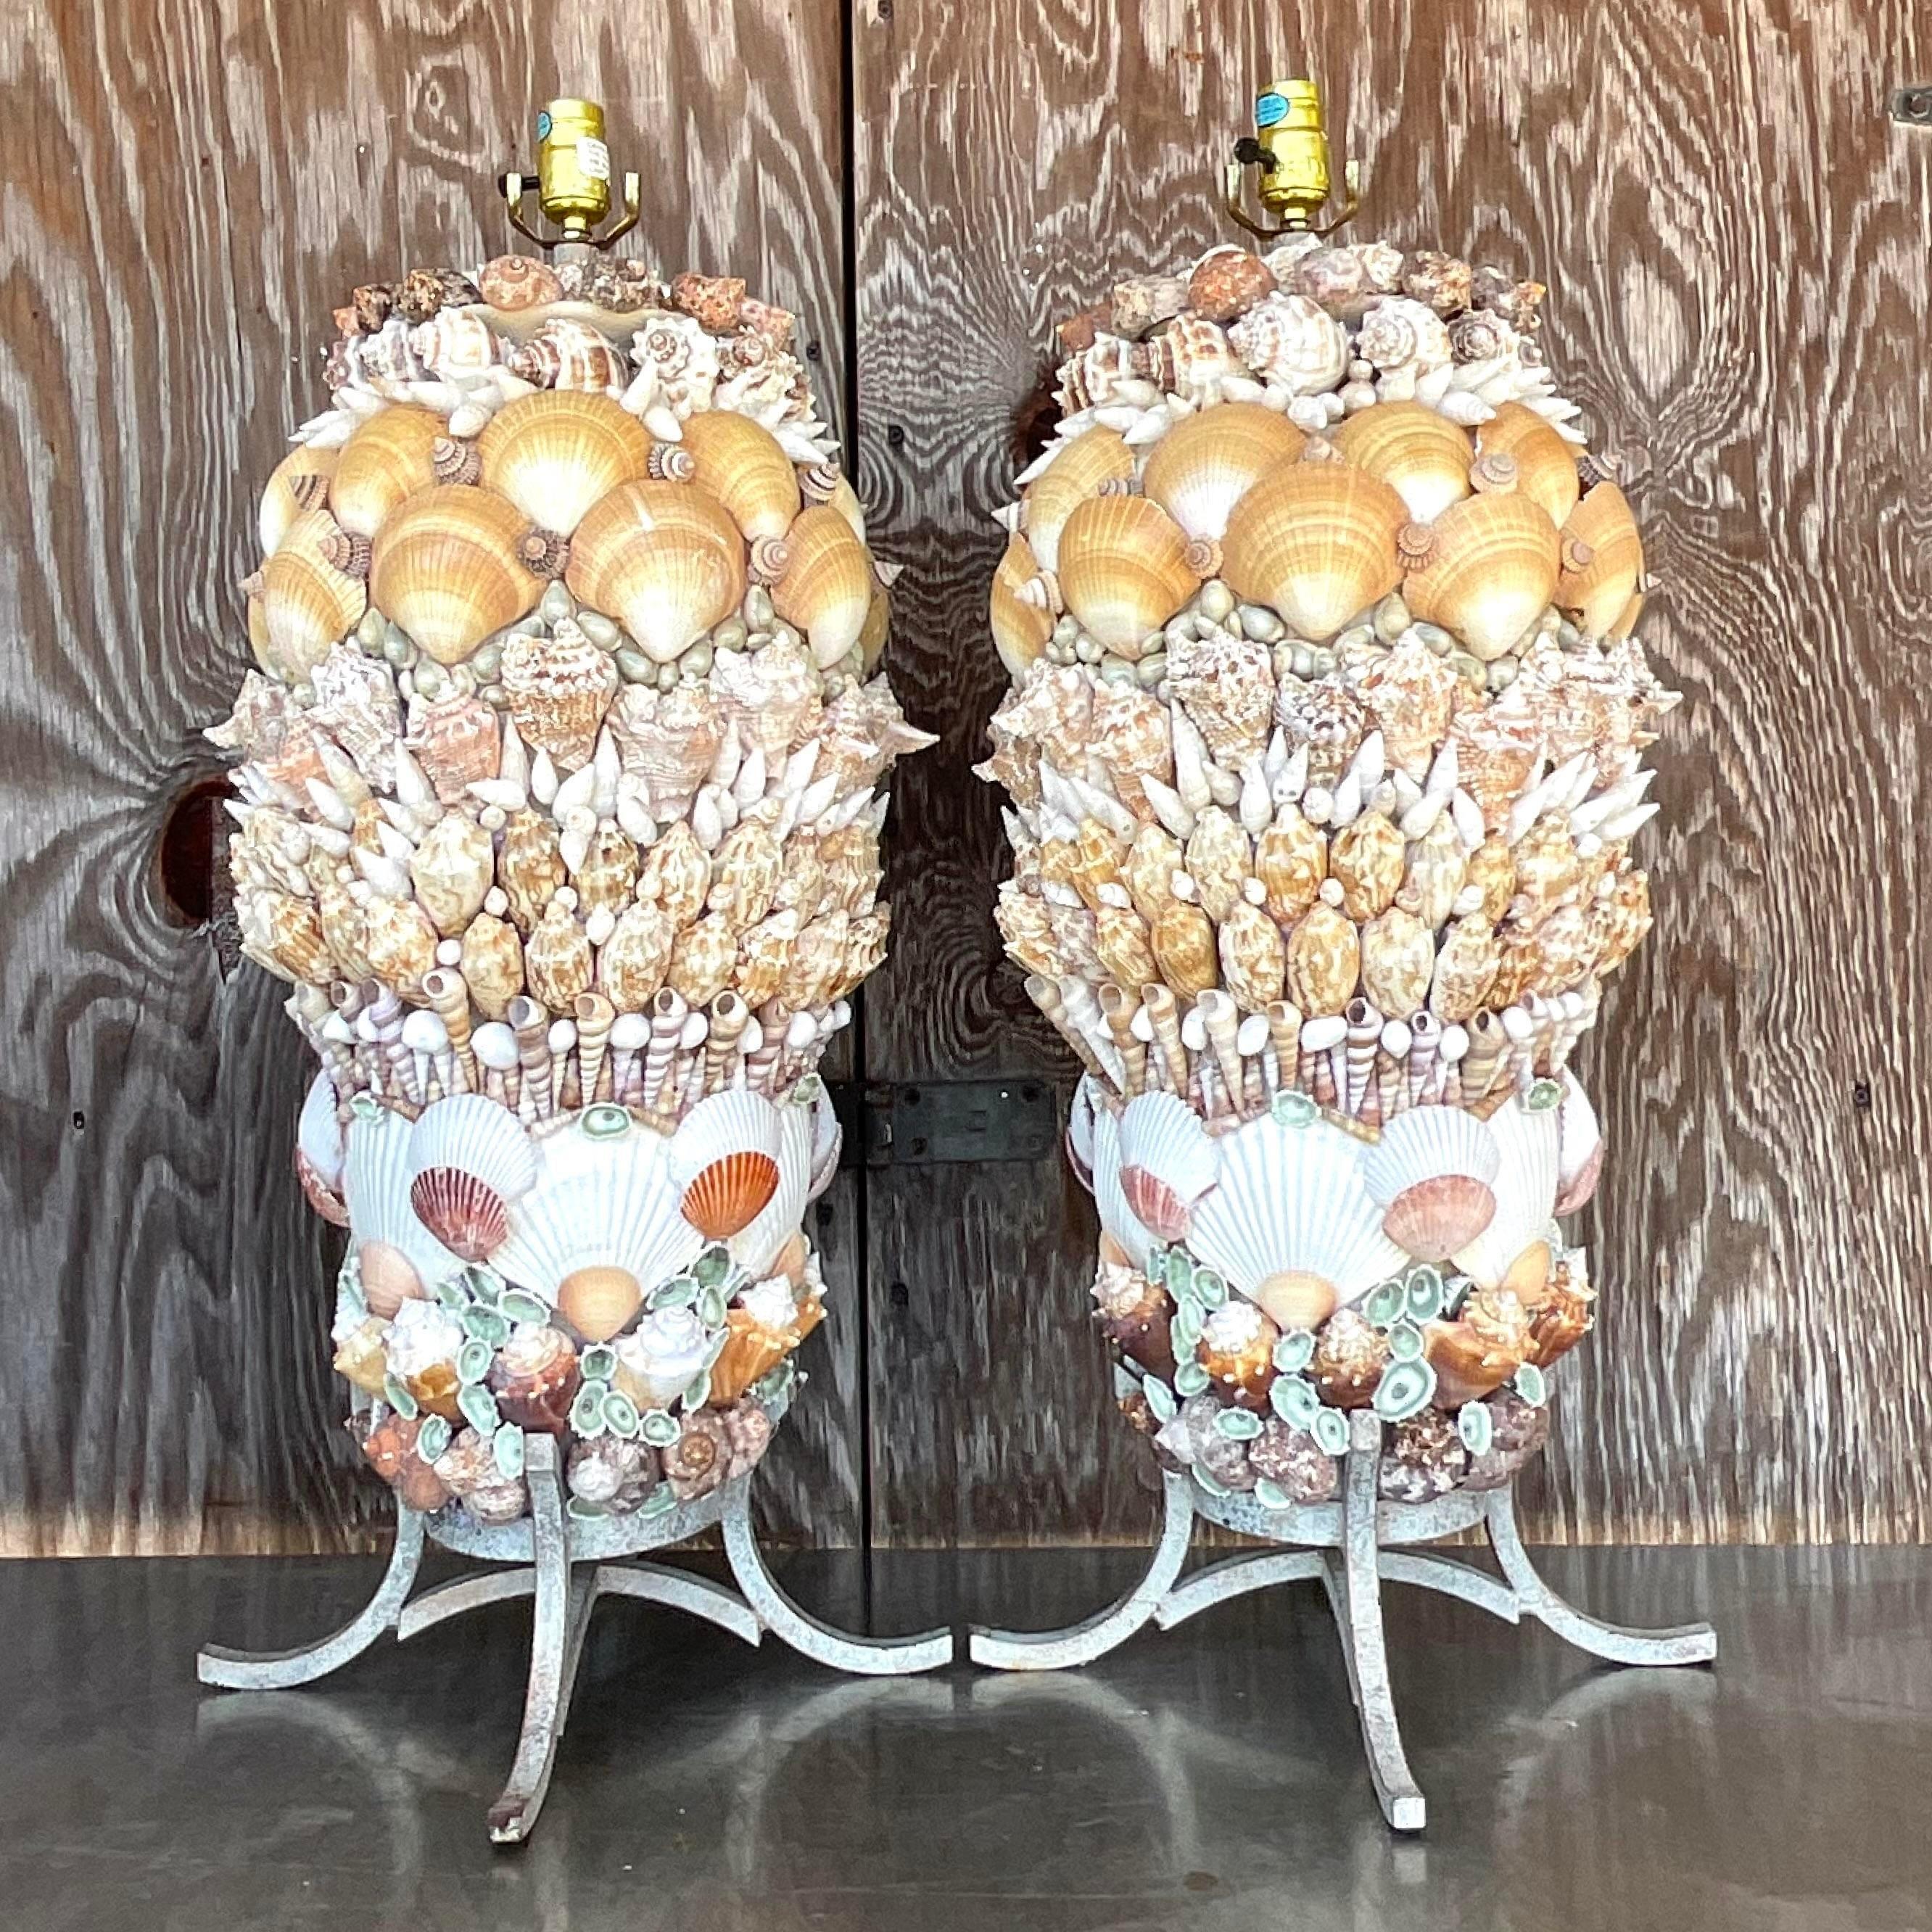 20th Century Vintage Costal Shell Table Lamps - a Pair For Sale